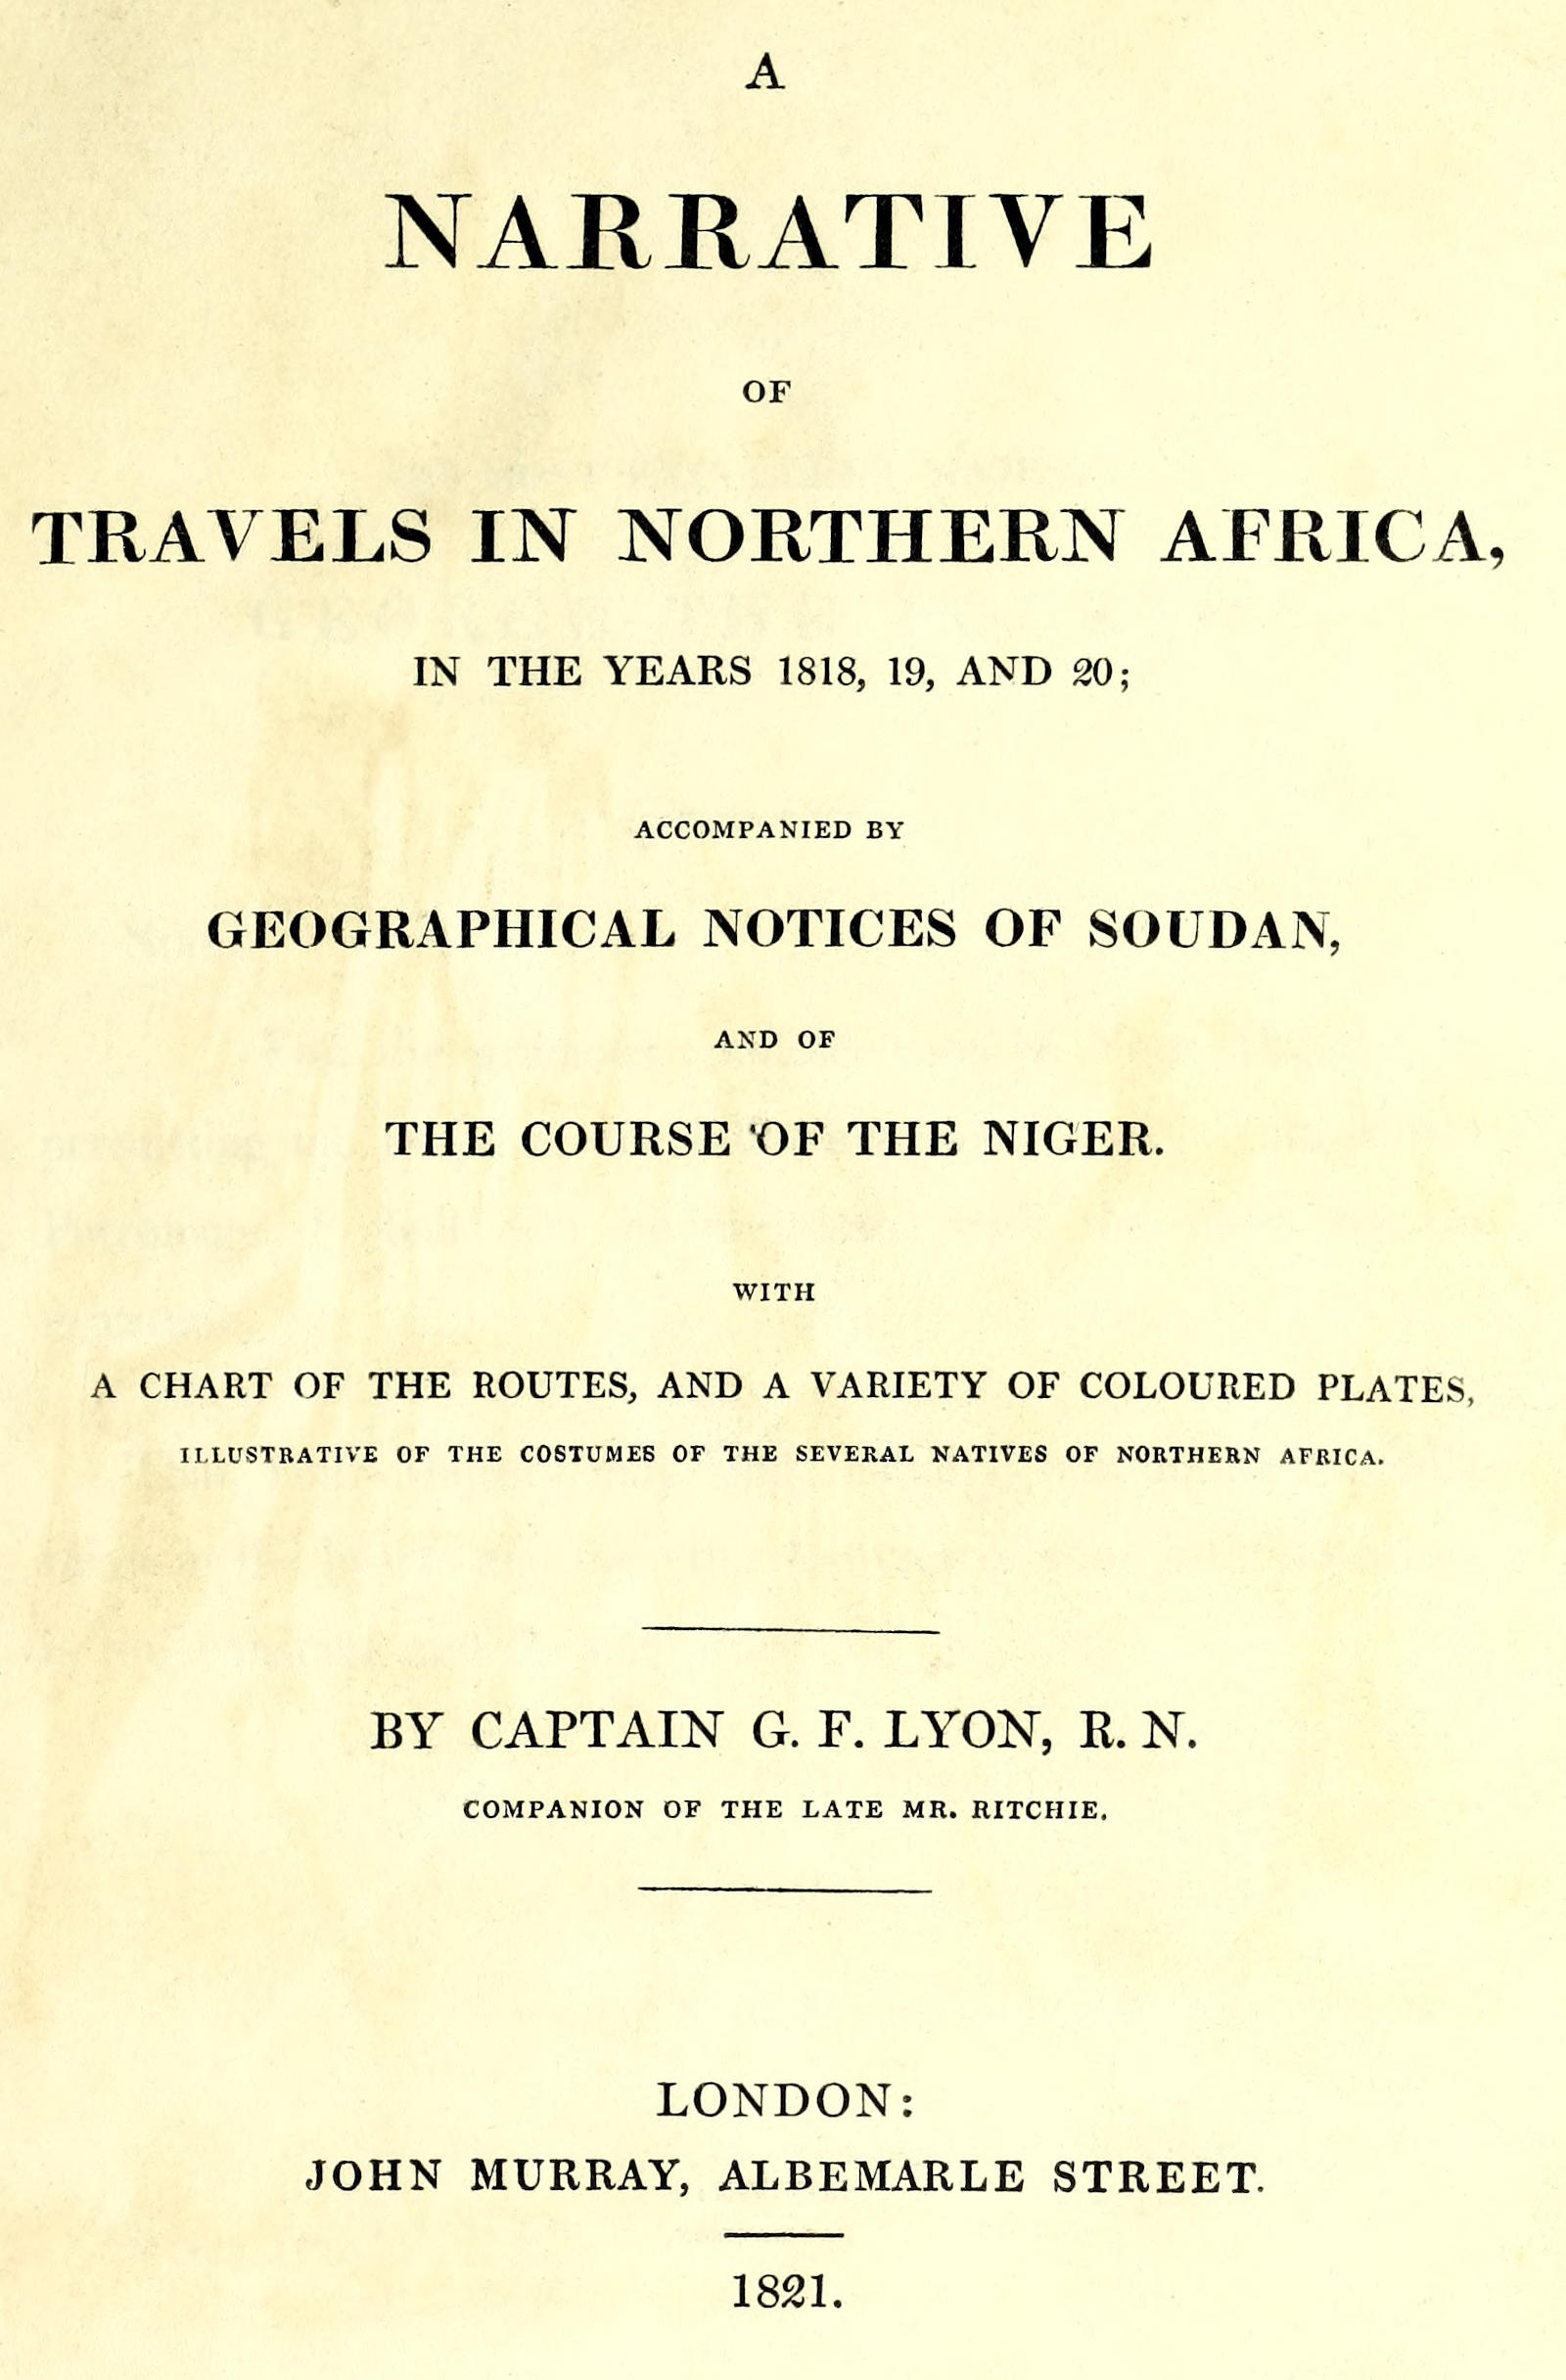 A narrative of travels in northern Africa in the years 1818, 19, and 20; accompanied by geographical notices of Soudan and of the course of the Niger